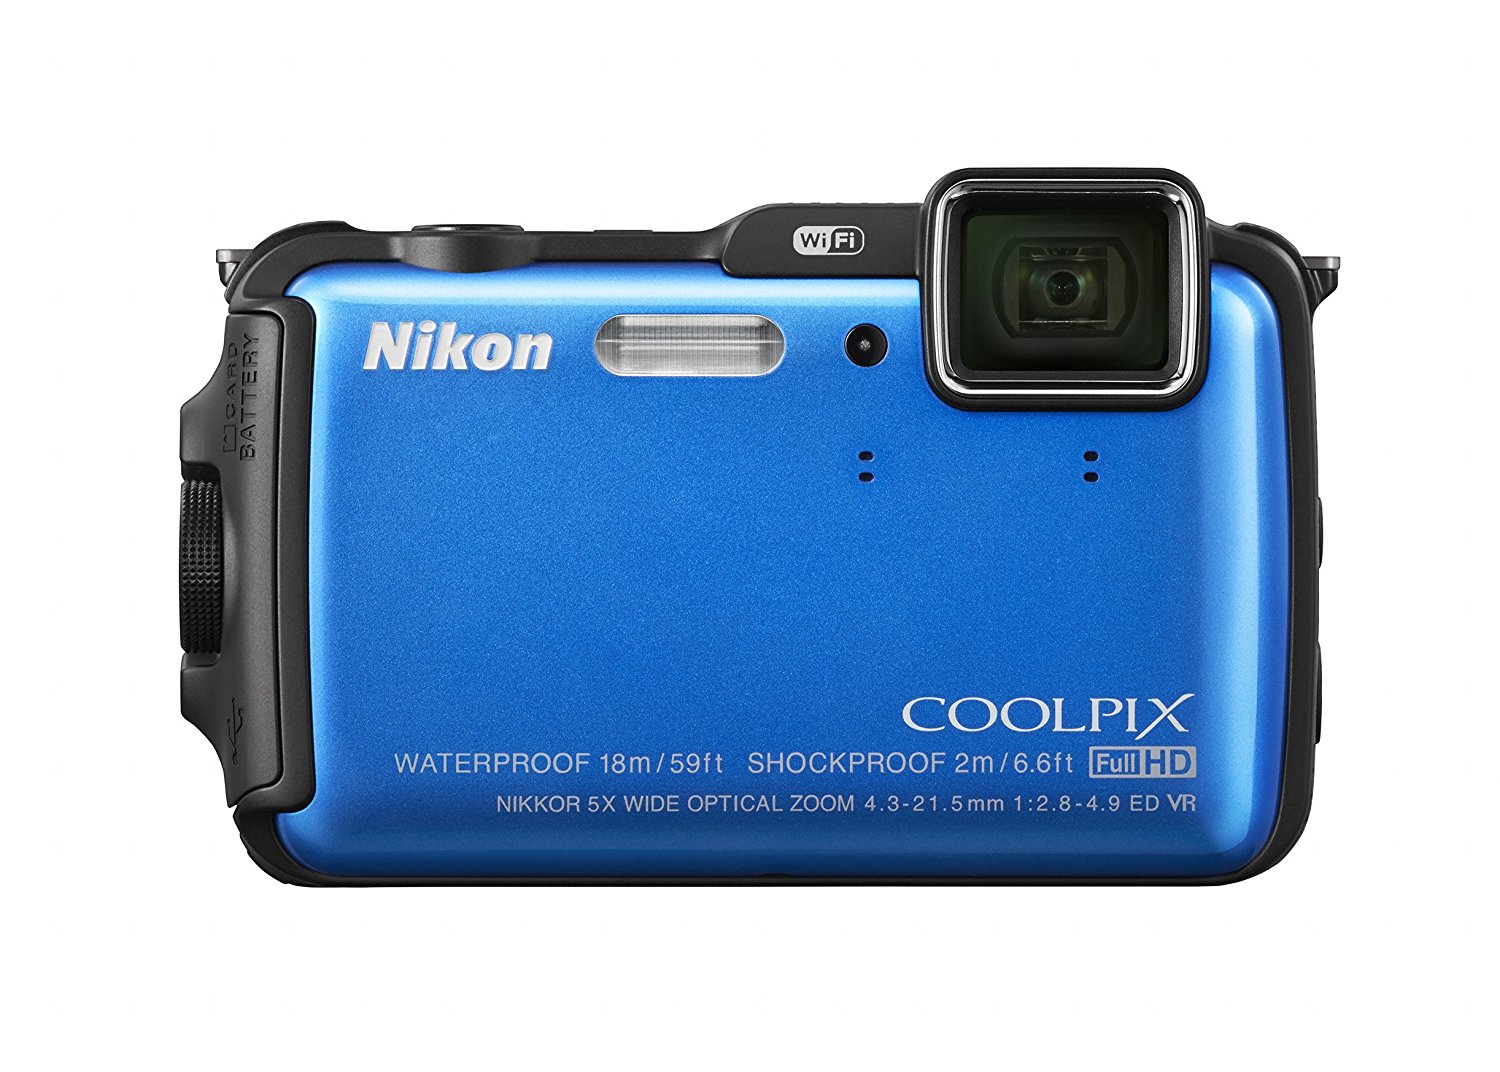 Nikon Coolpix Aw120 161 Mp Wi Fi And Waterproof Digital Camera With Gps And Full Hd 1080p Video 6601